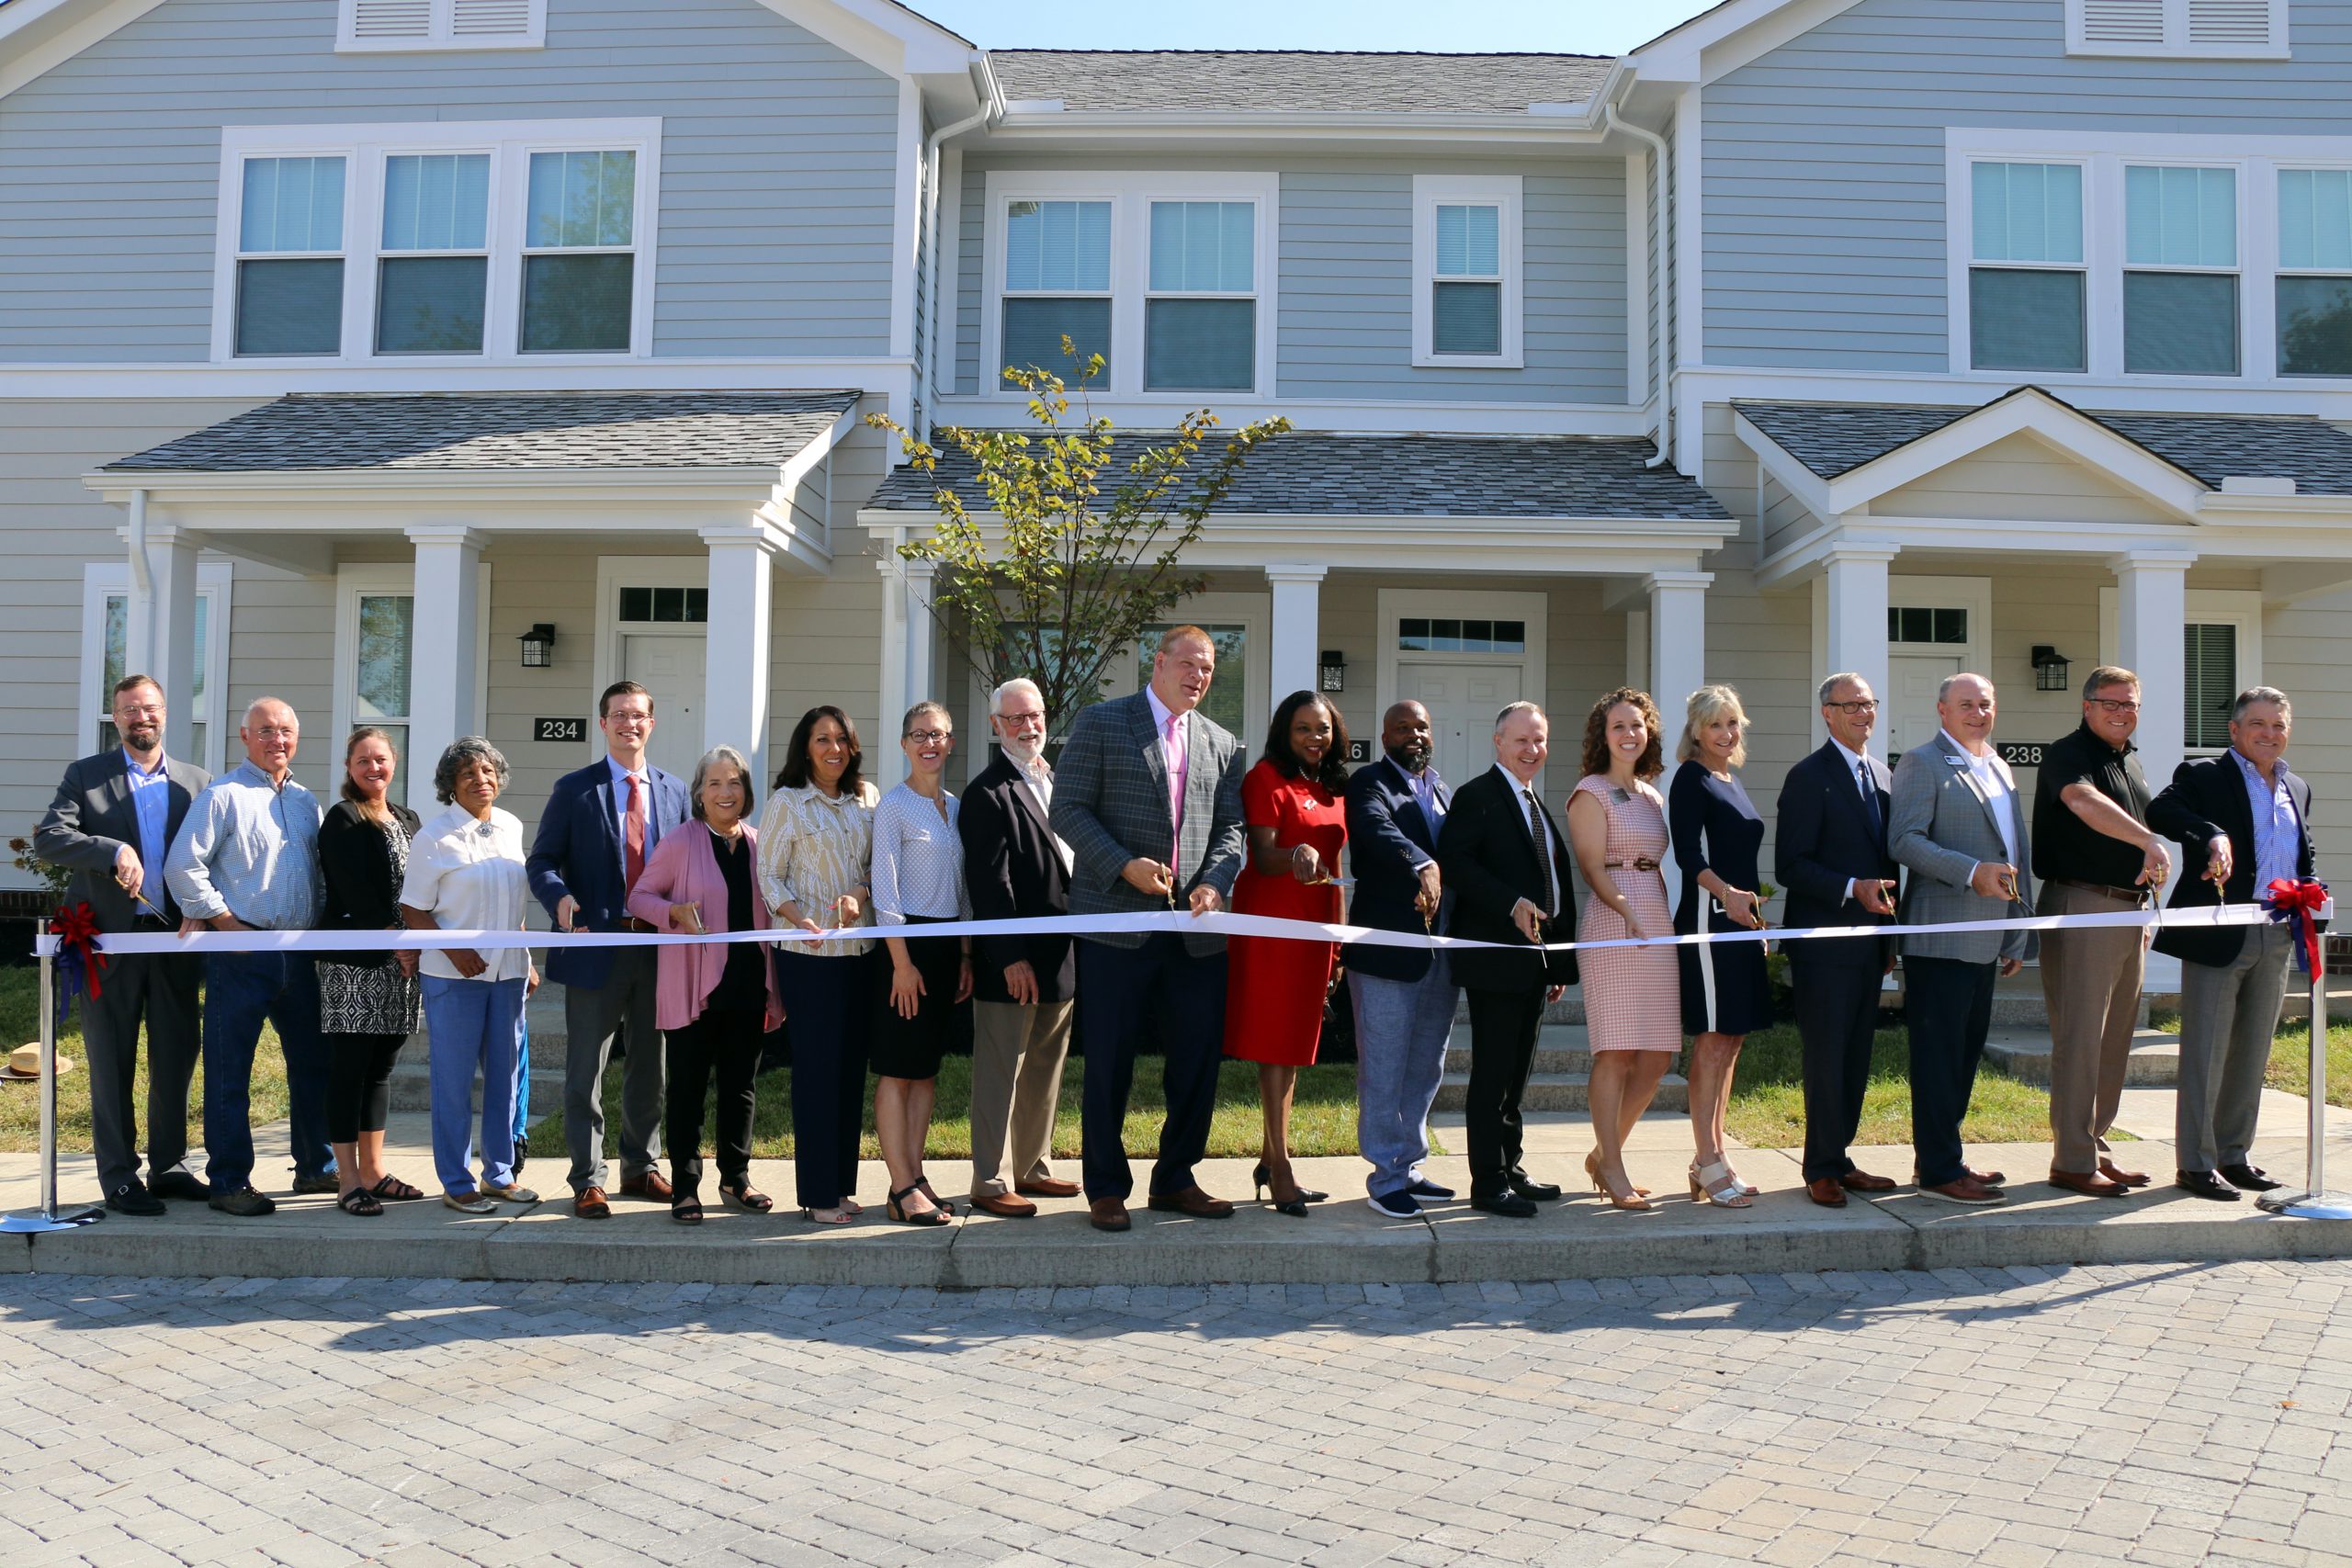 Featured image for “KCDC officially opens new Five Points affordable housing”